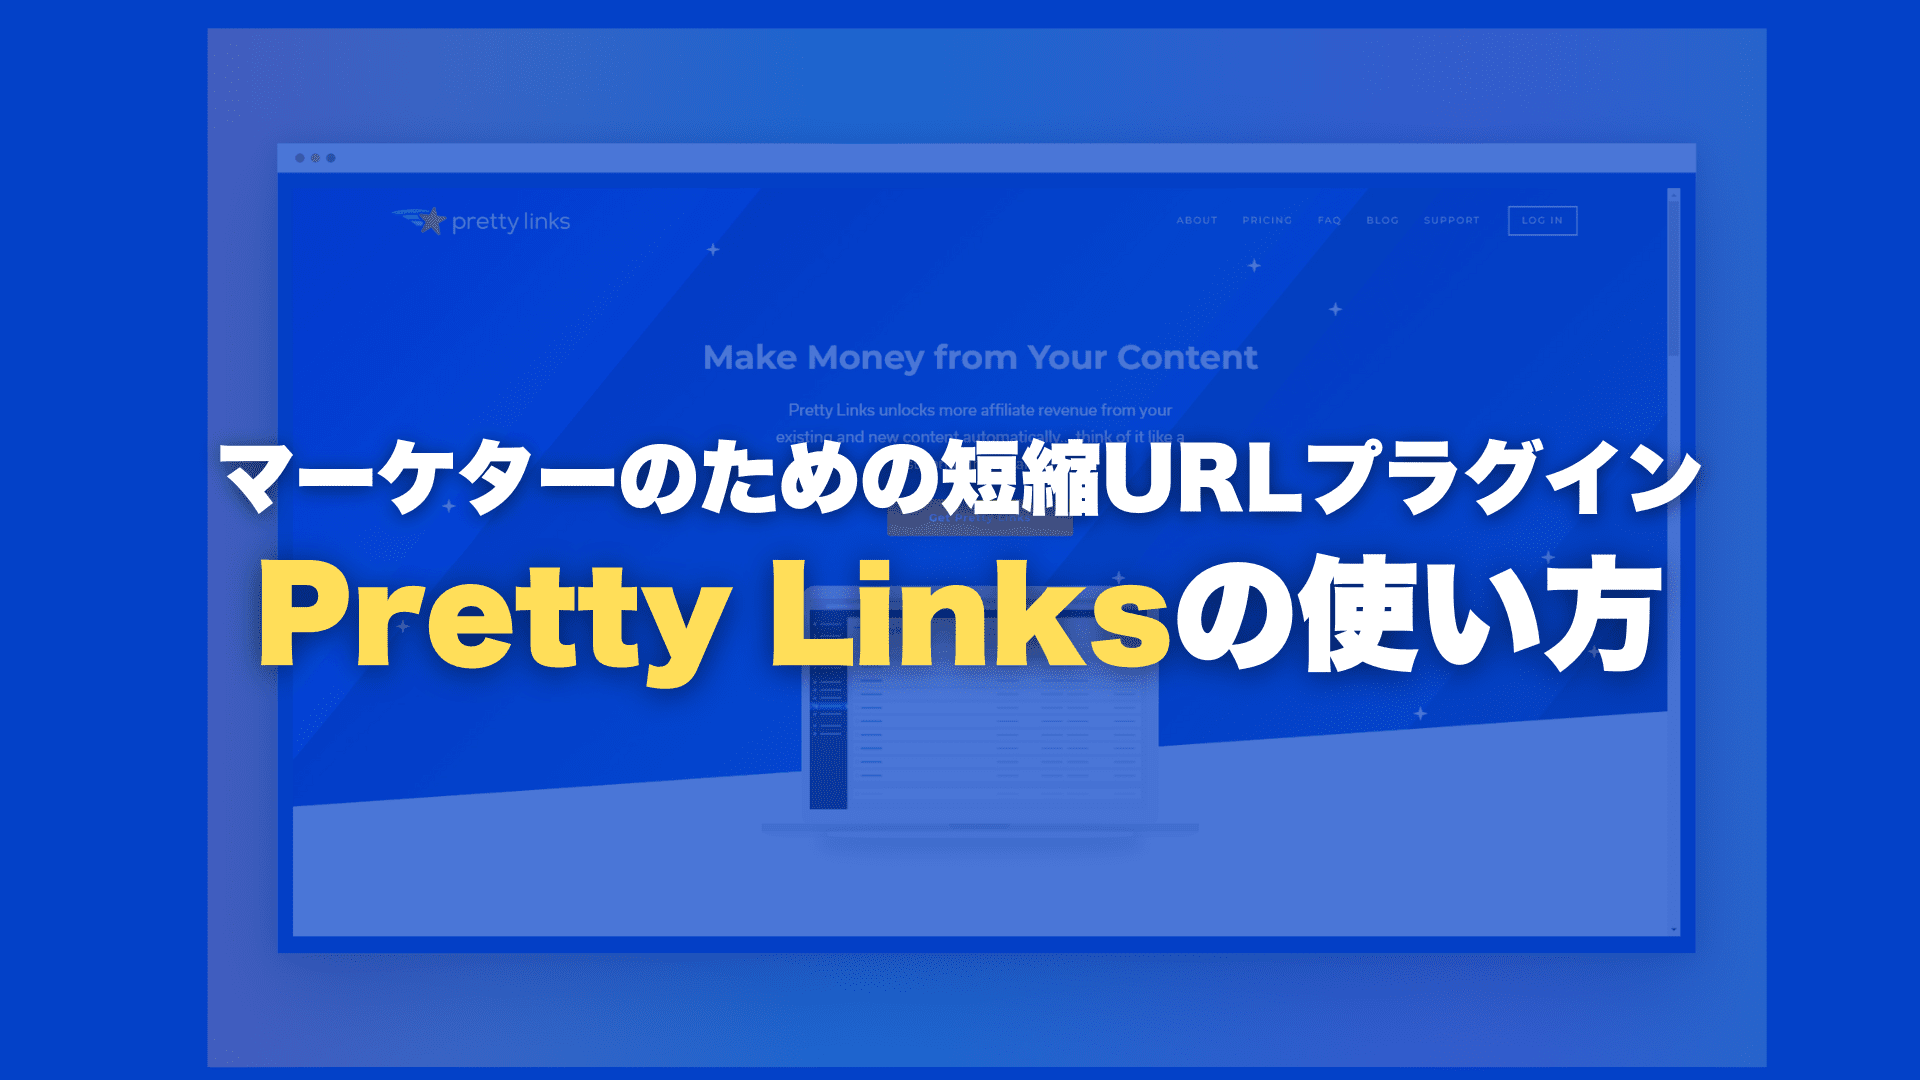 Pretty Links Review: Pros & Cons, Price (2023)